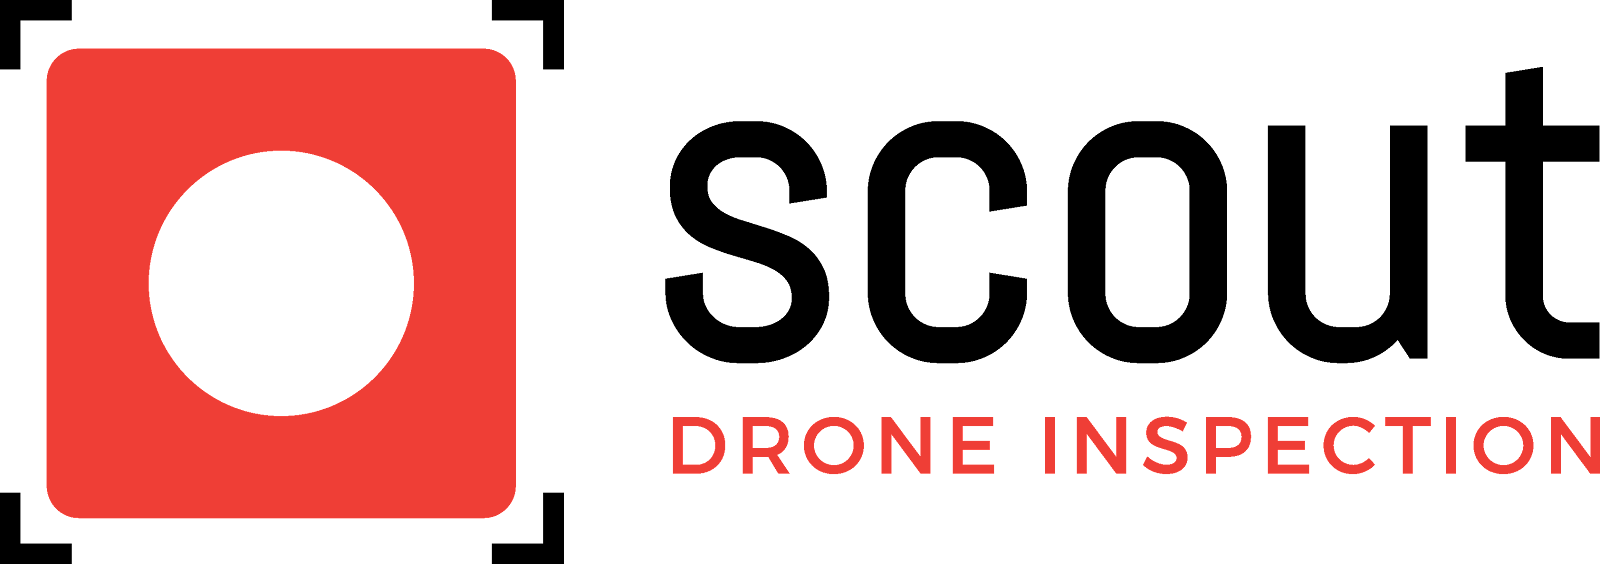 Scout Drone Inspection logo